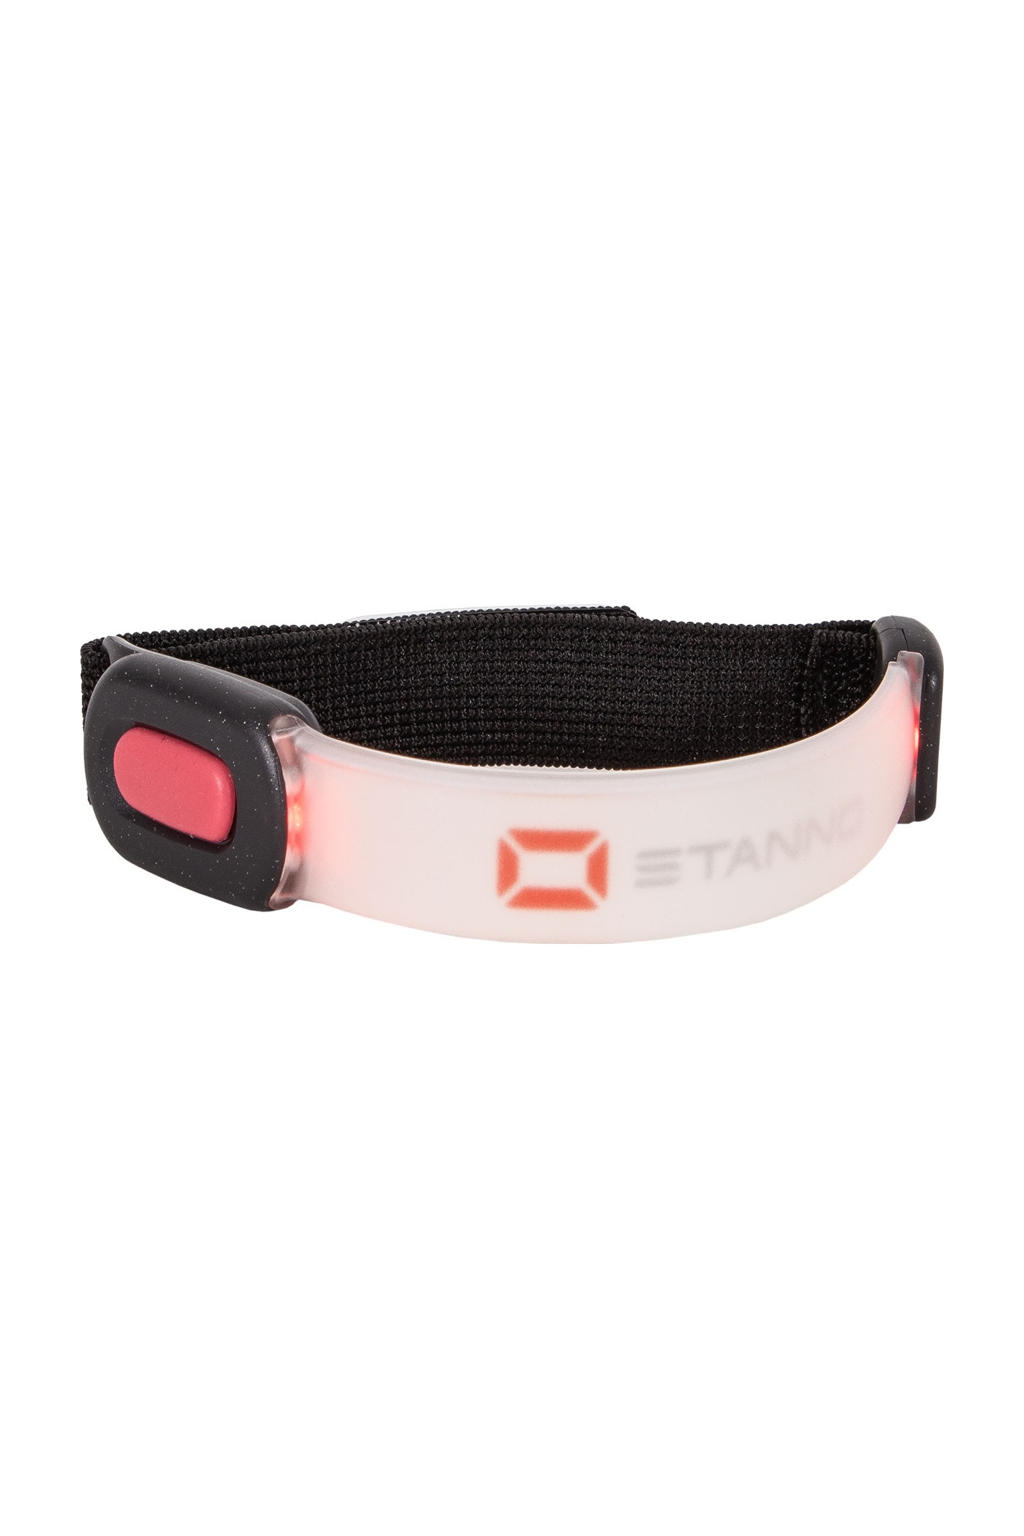 Stanno   LED sportarmband wit/rood